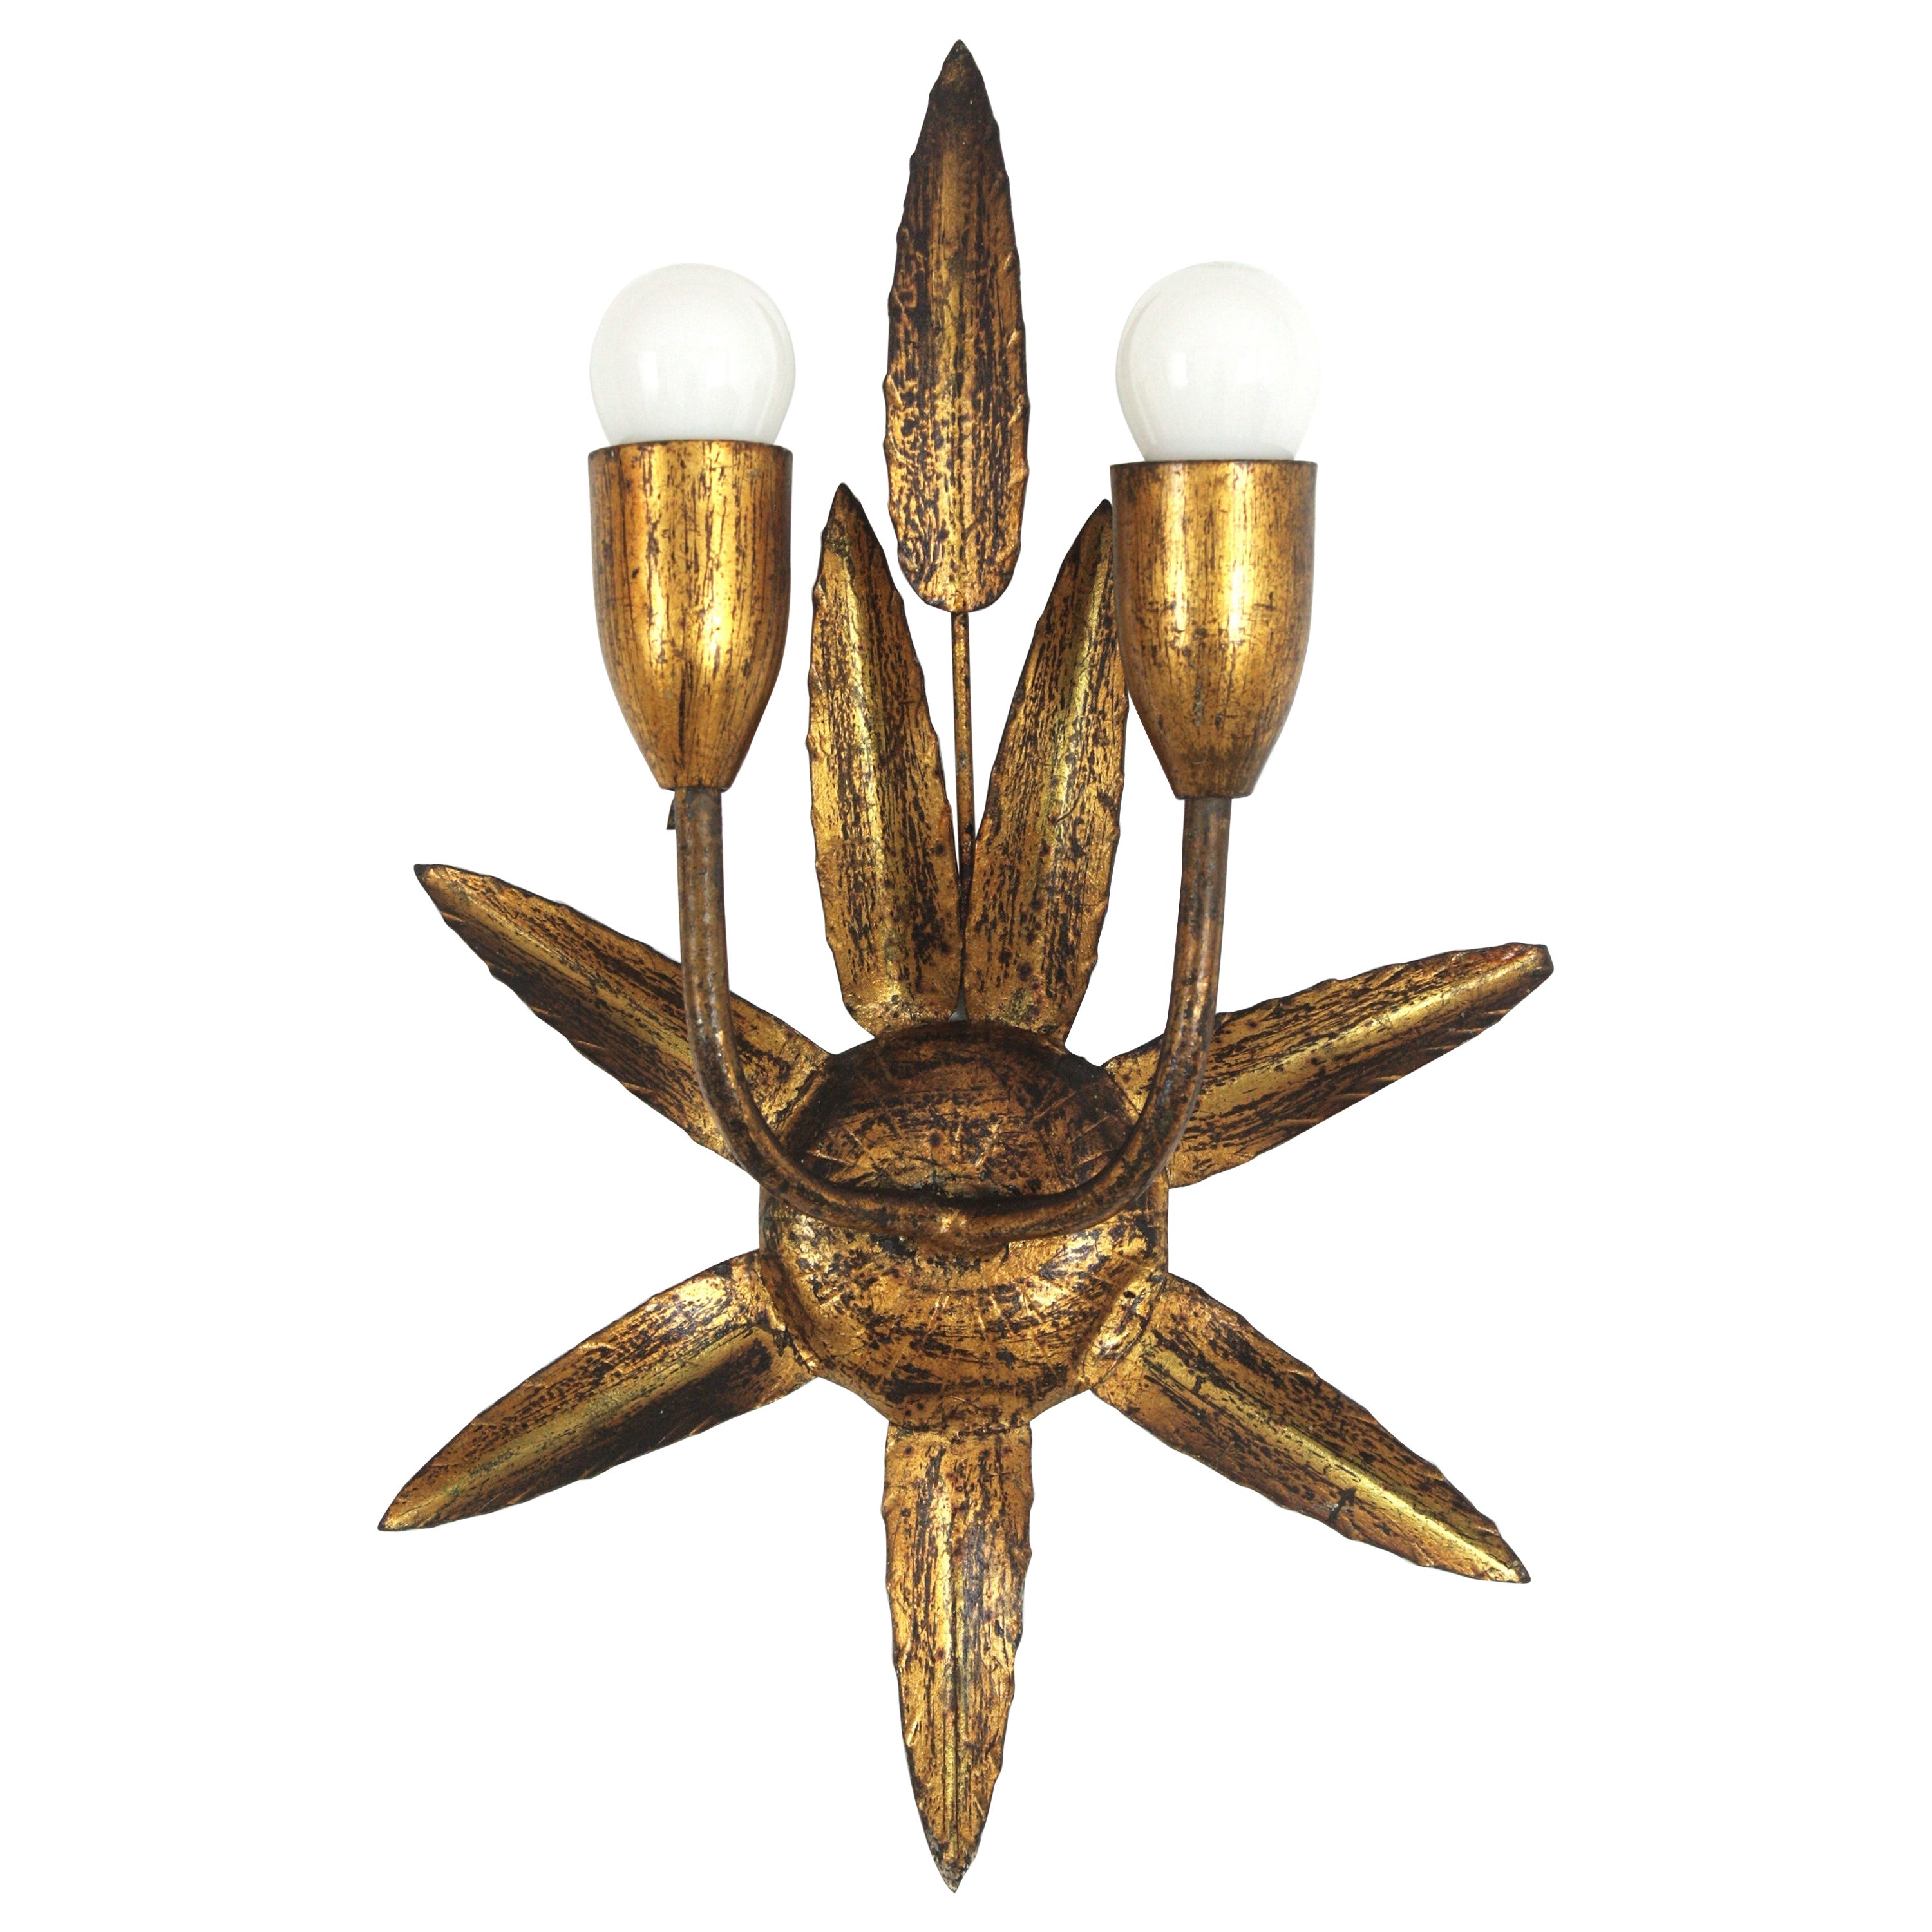 Spanish Gilt Iron Wall Sconce with Foliage Design and Starburst Backplate, 1950s For Sale